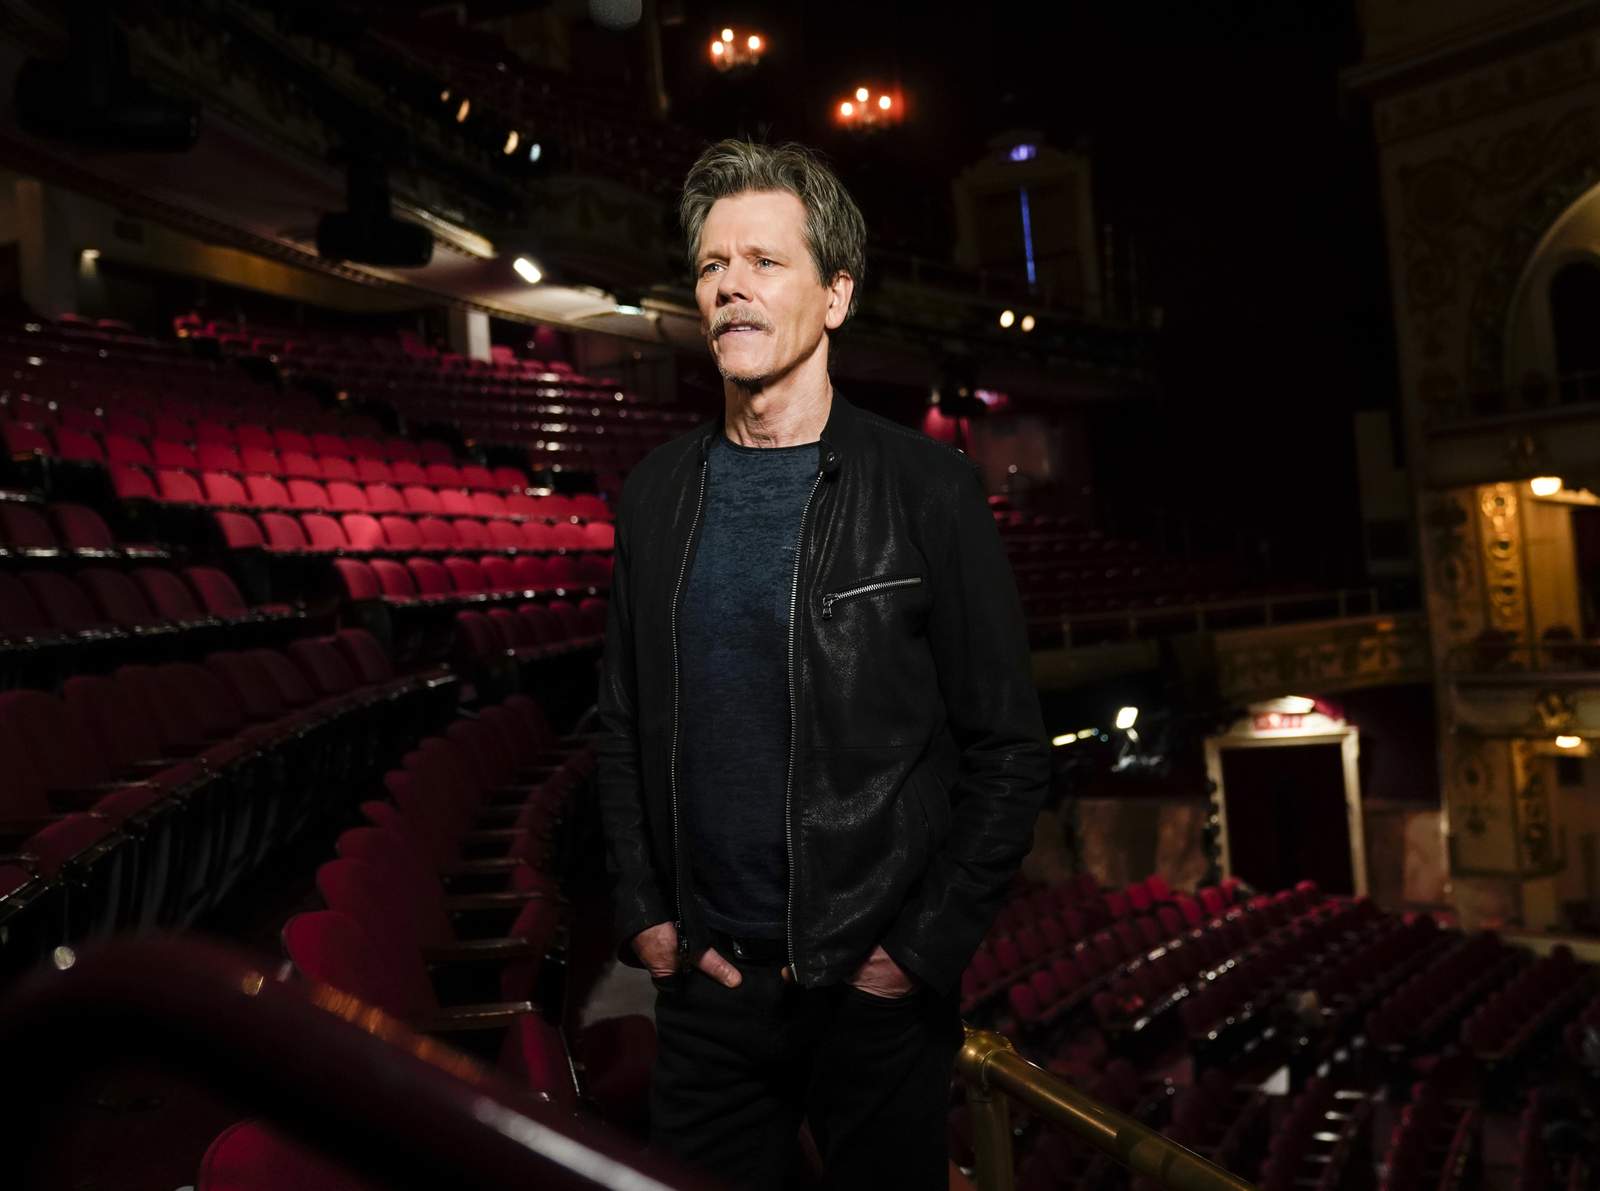 Kevin Bacon brings music back to venues for charity concert